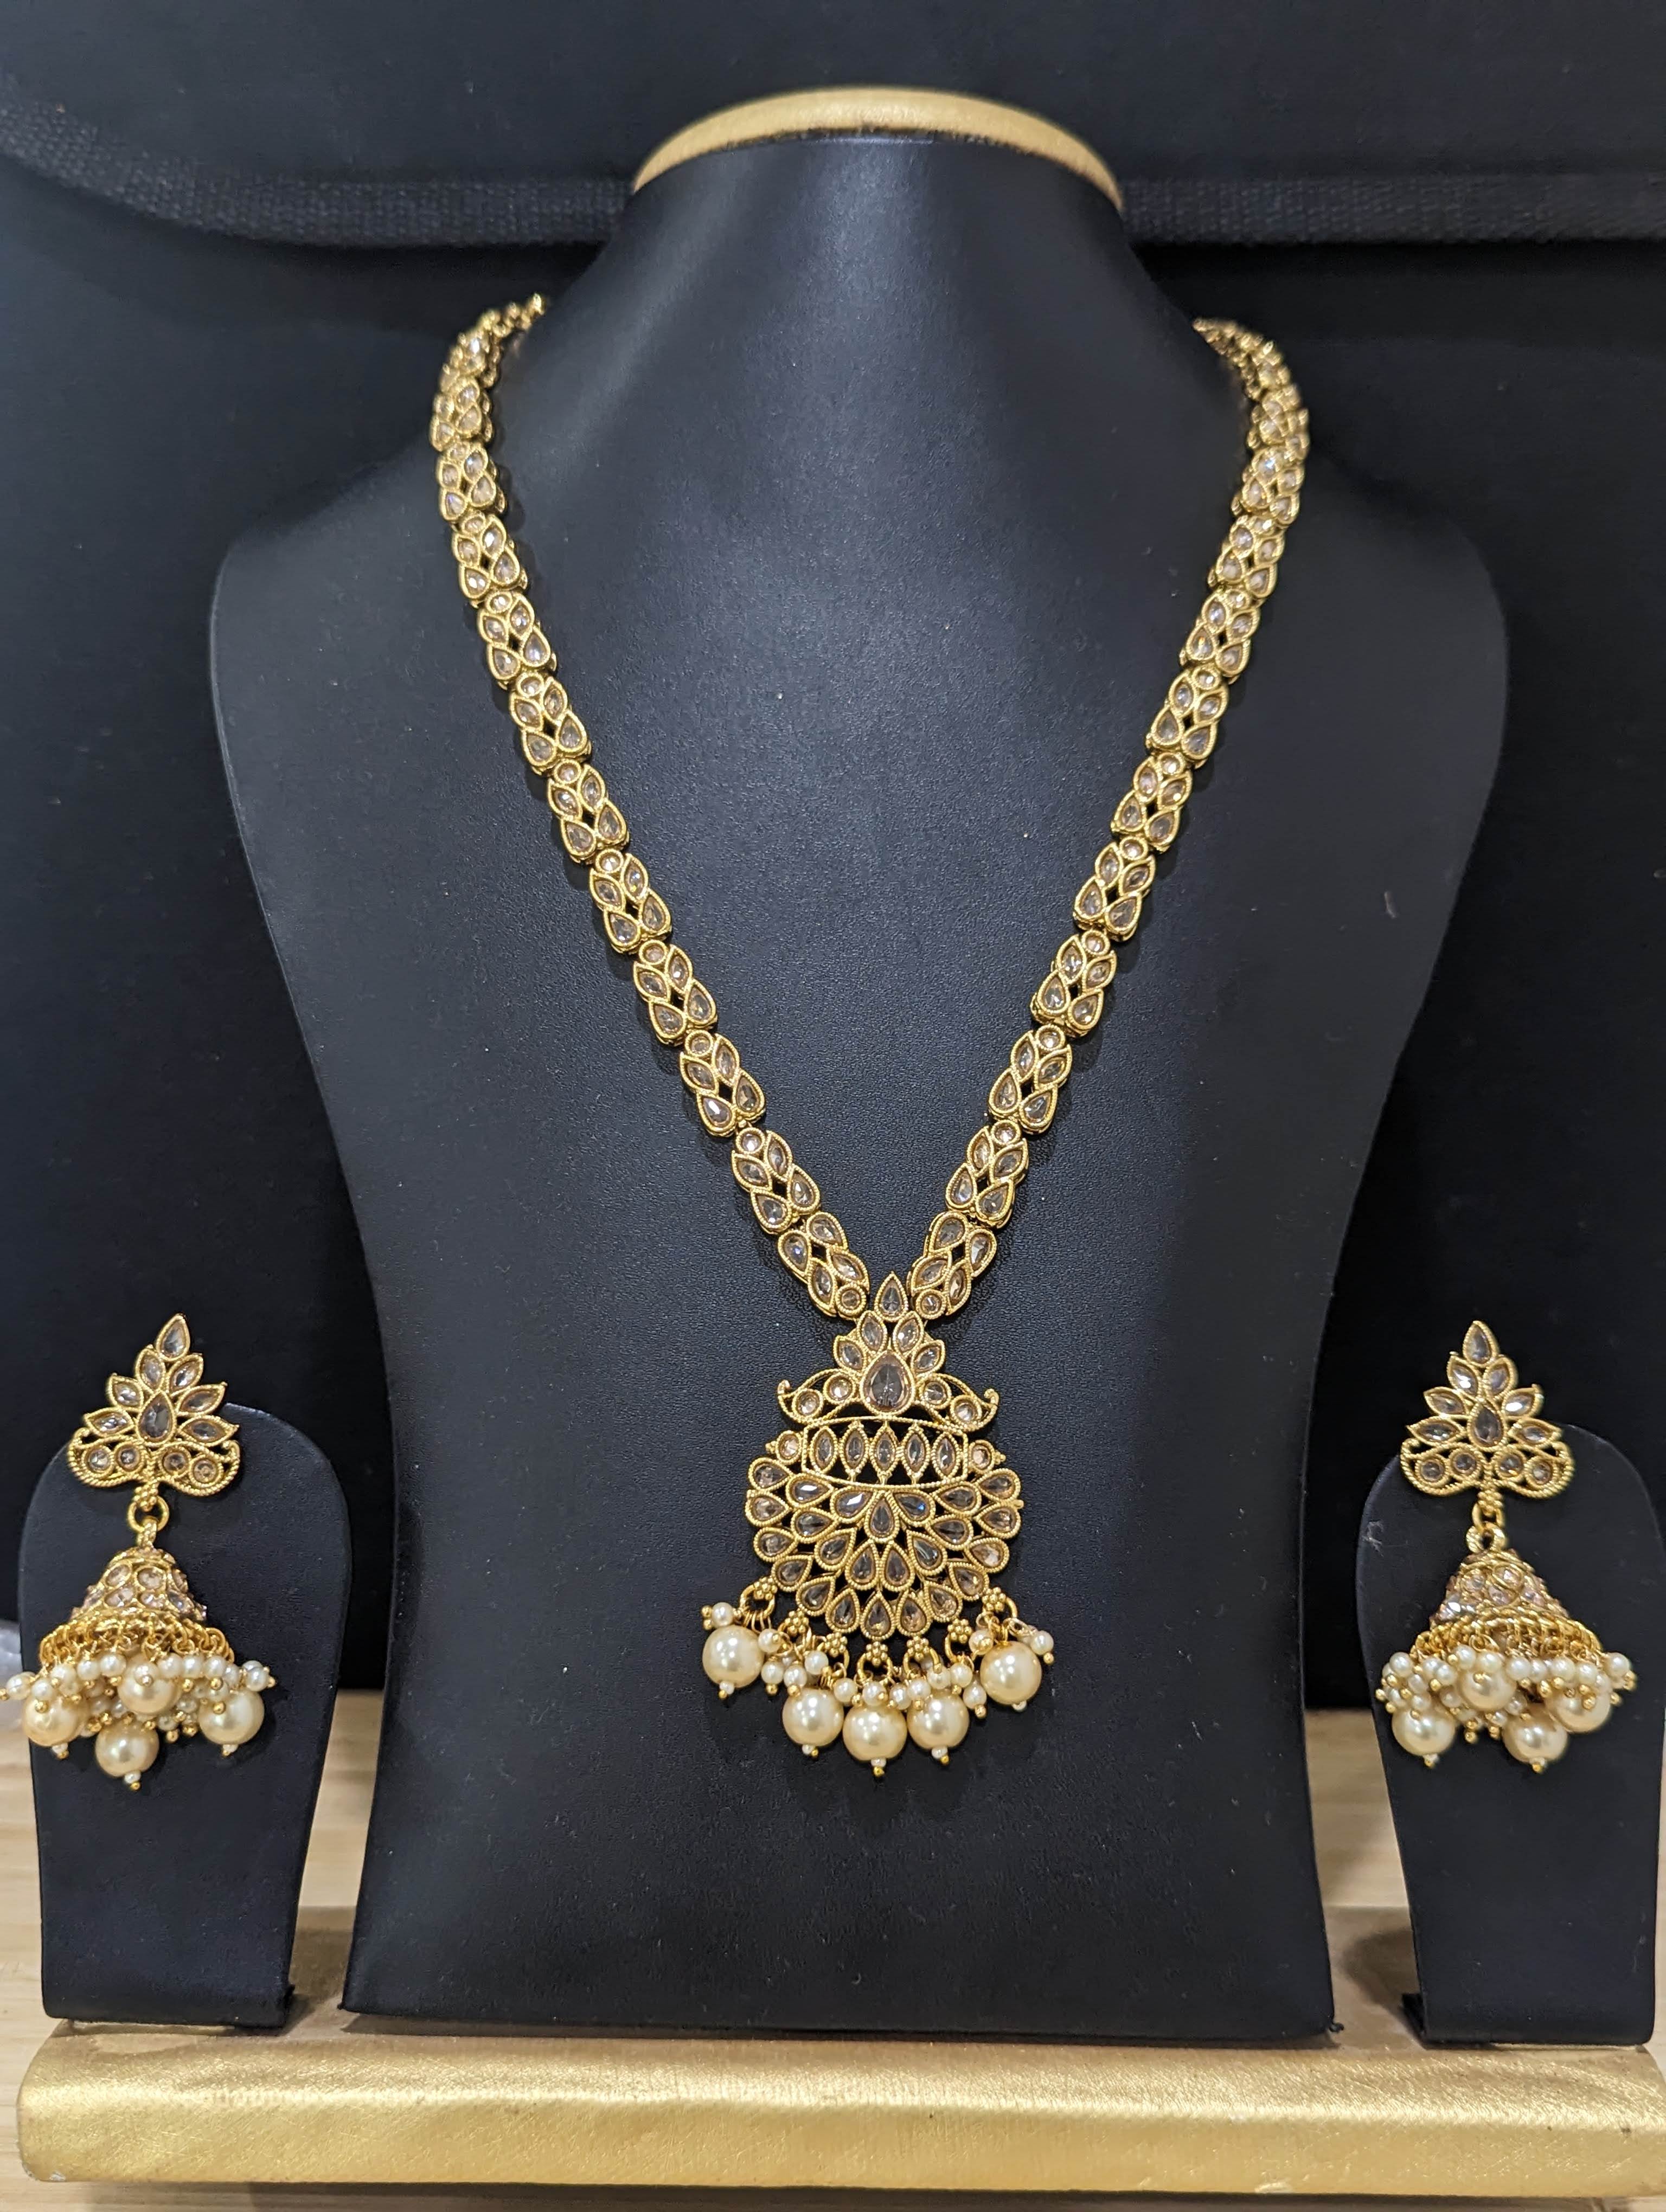 Tinkling Bell Chain Drop Gold Jhumka Earrings | Jewelry Online Shopping |  Gold Studs & Earrings